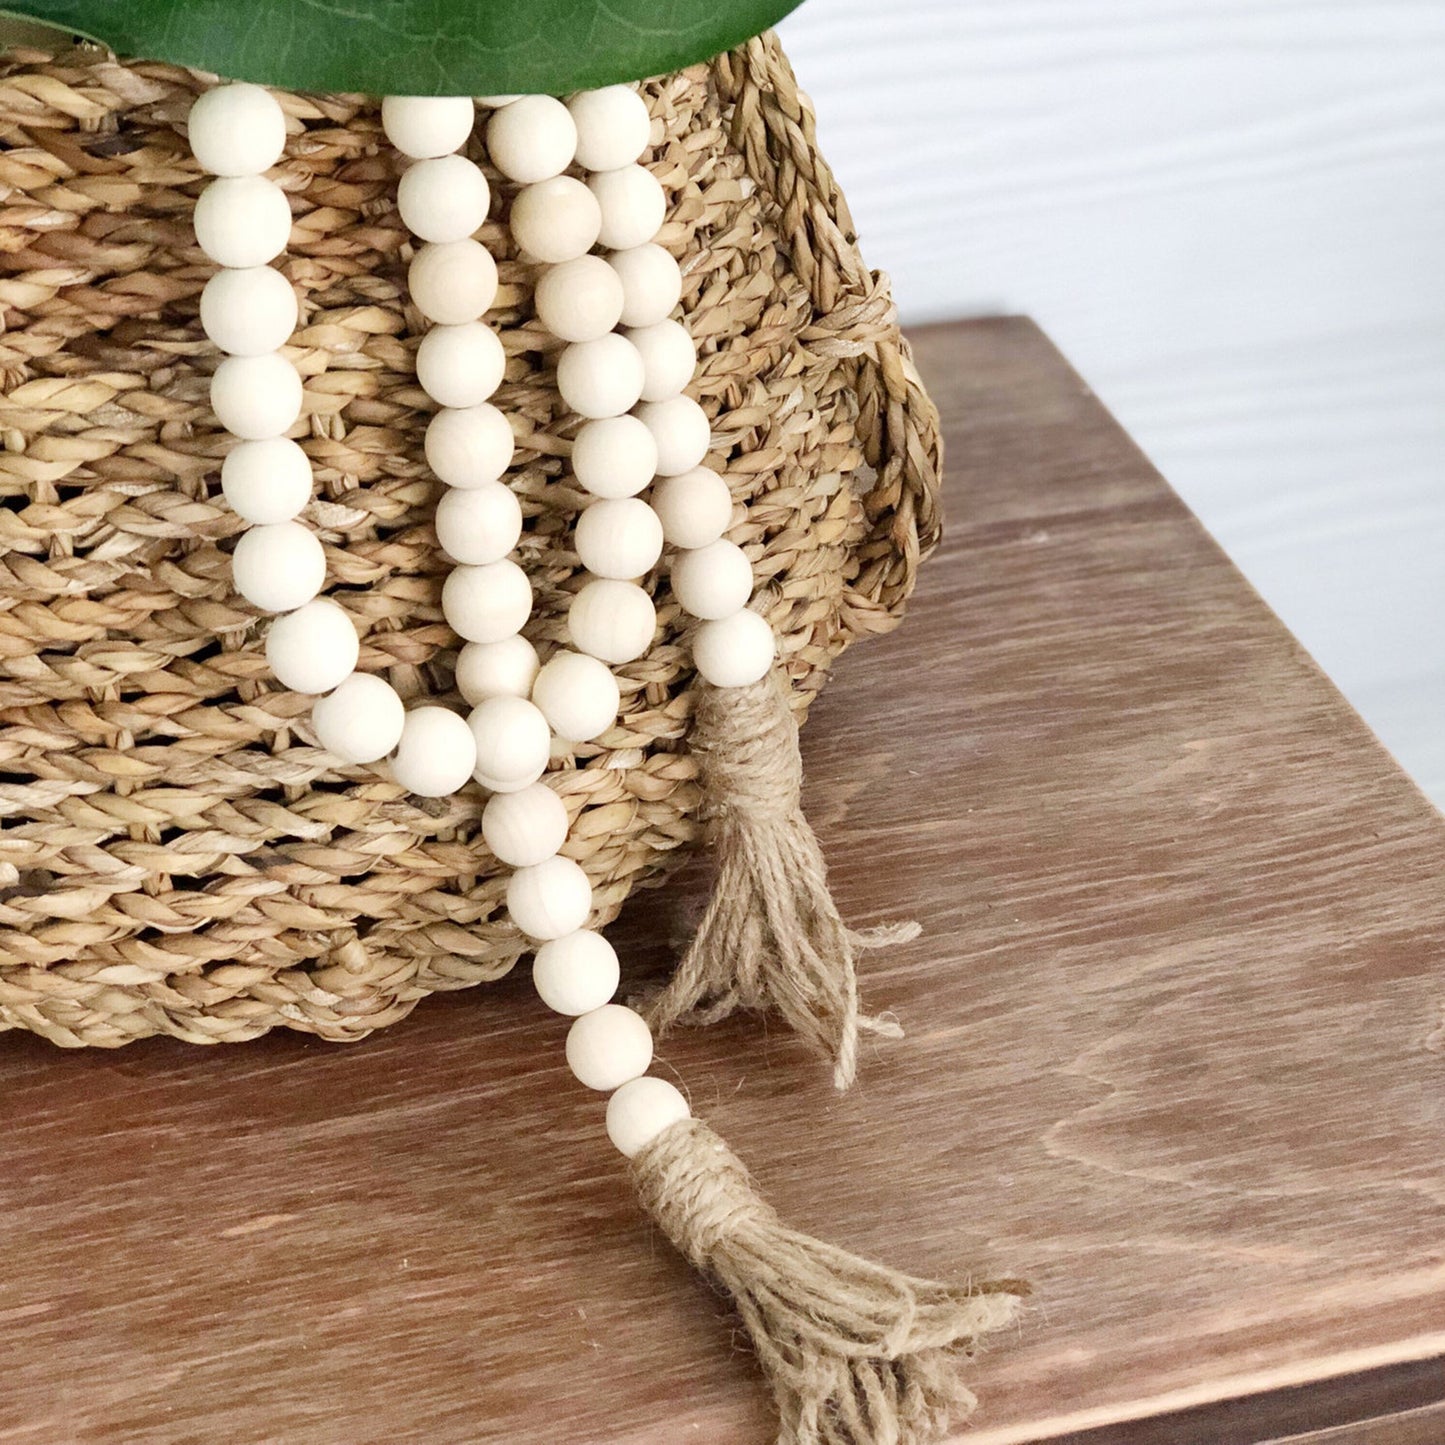 CVHOMEDECO. Wood Beads Garland with Tassels Farmhouse Rustic Wooden Prayer Bead String Wall Hanging Accent for Home Festival Decor. Natural